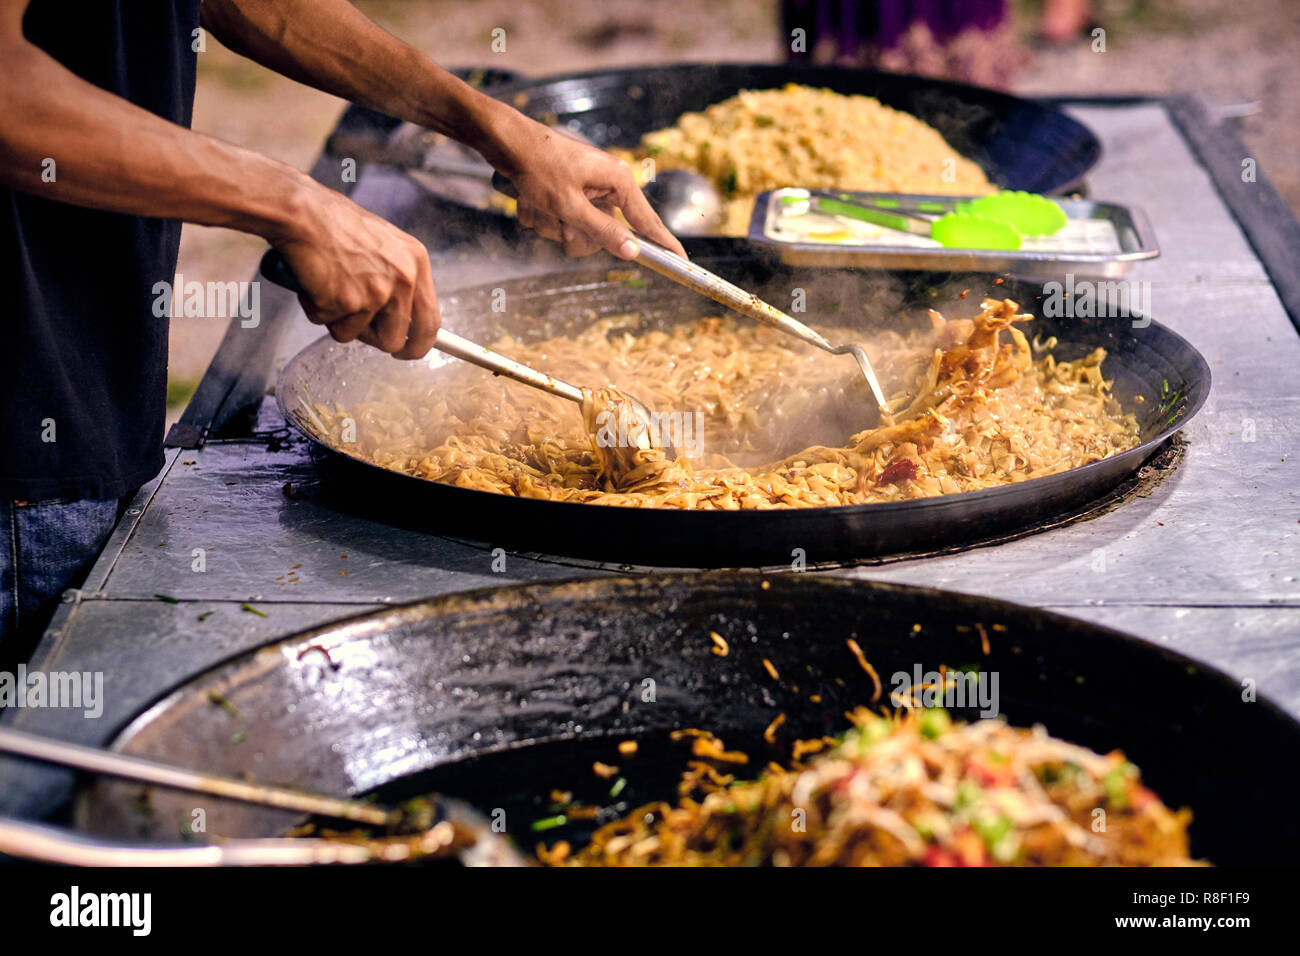 Fried Noodles In A Wok Asian Indian And Chinese Street Food